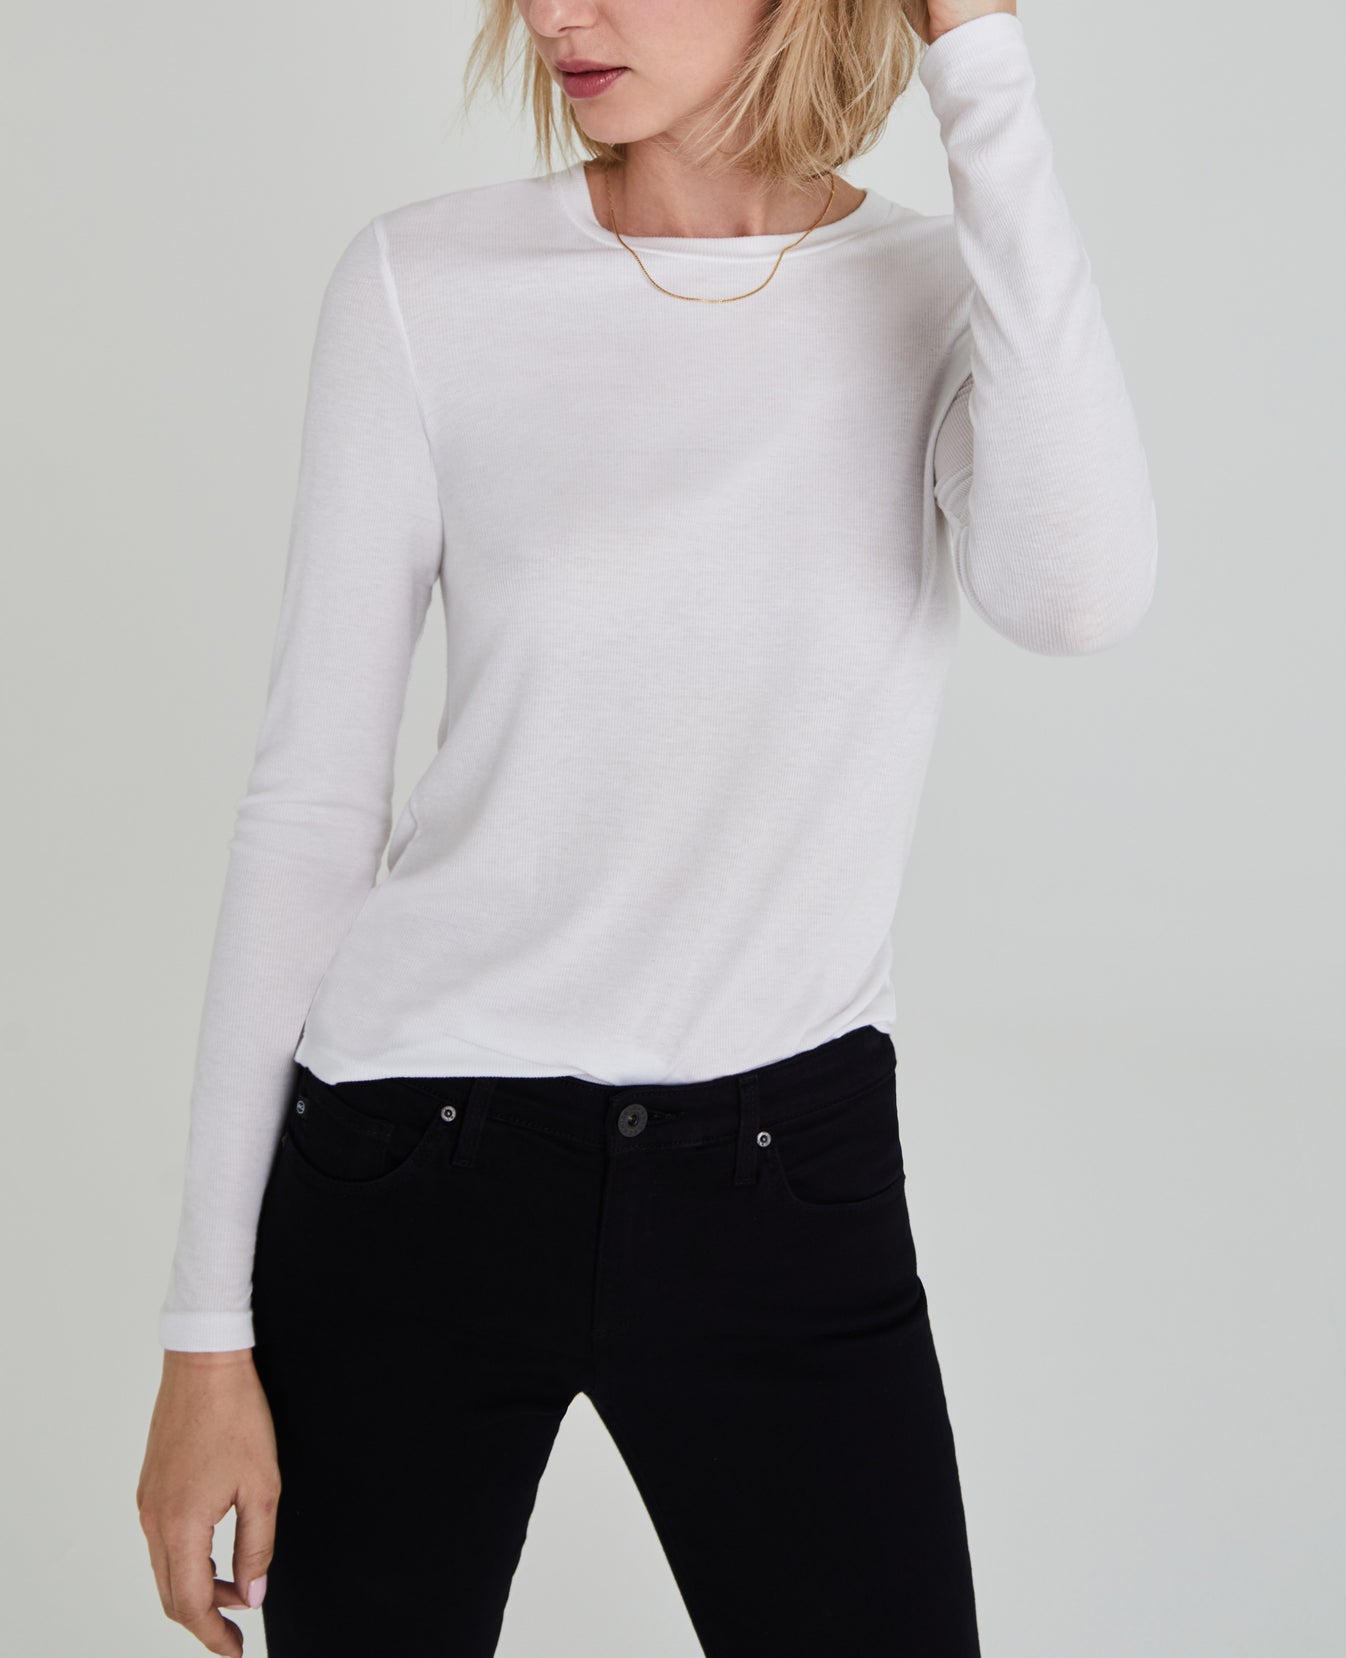 LB Shirt True White Fitted Long Sleeve Tee Women Tops Photo 1